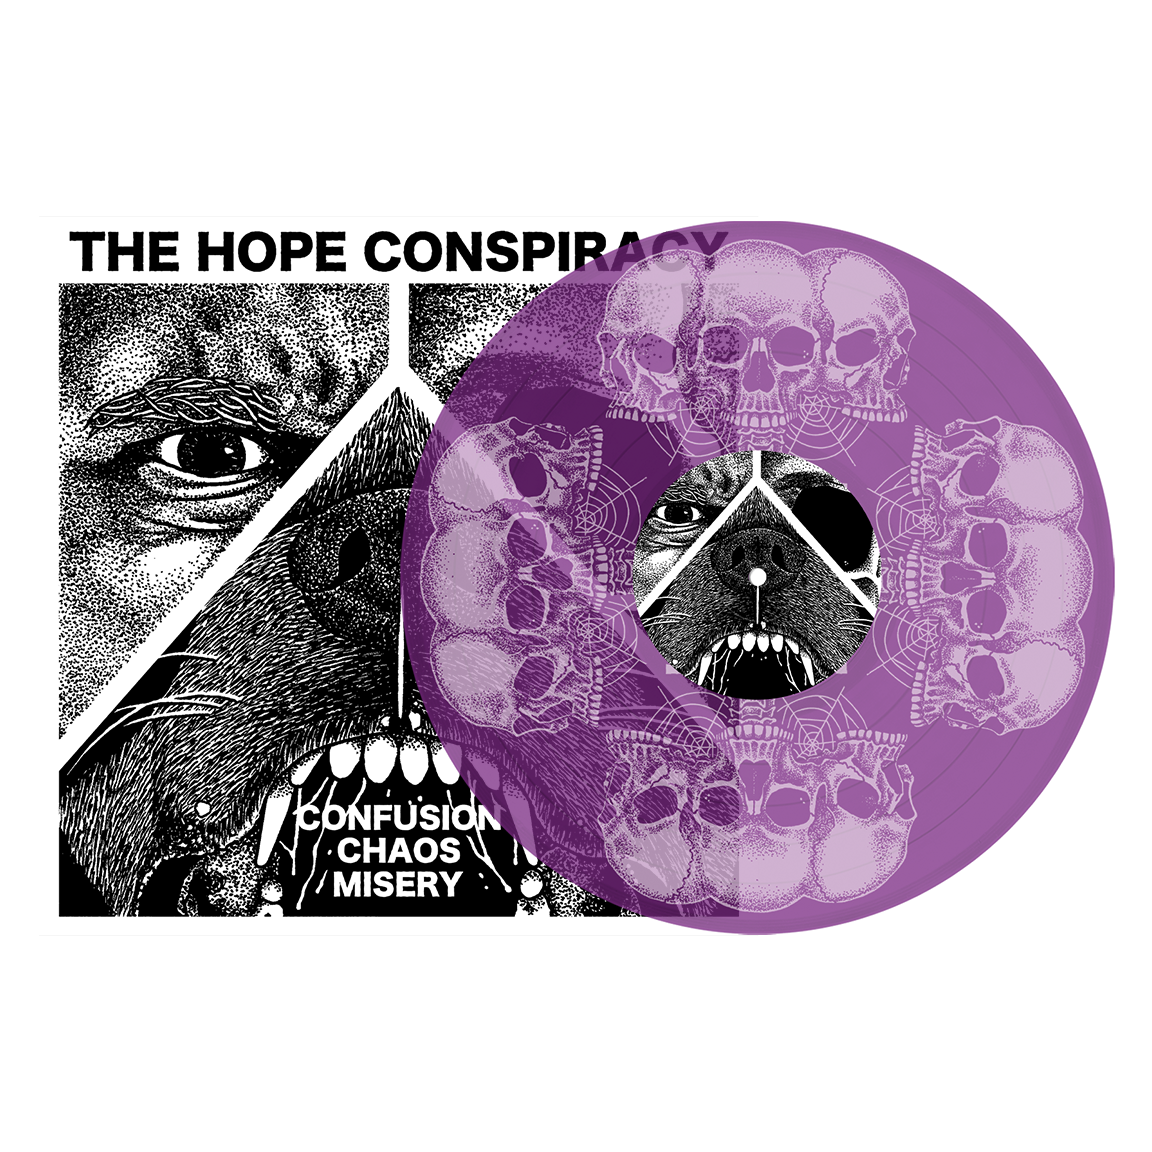 THE HOPE CONSPIRACY • Confusion/Chaos/Misery • 12" EP • Pre-Order